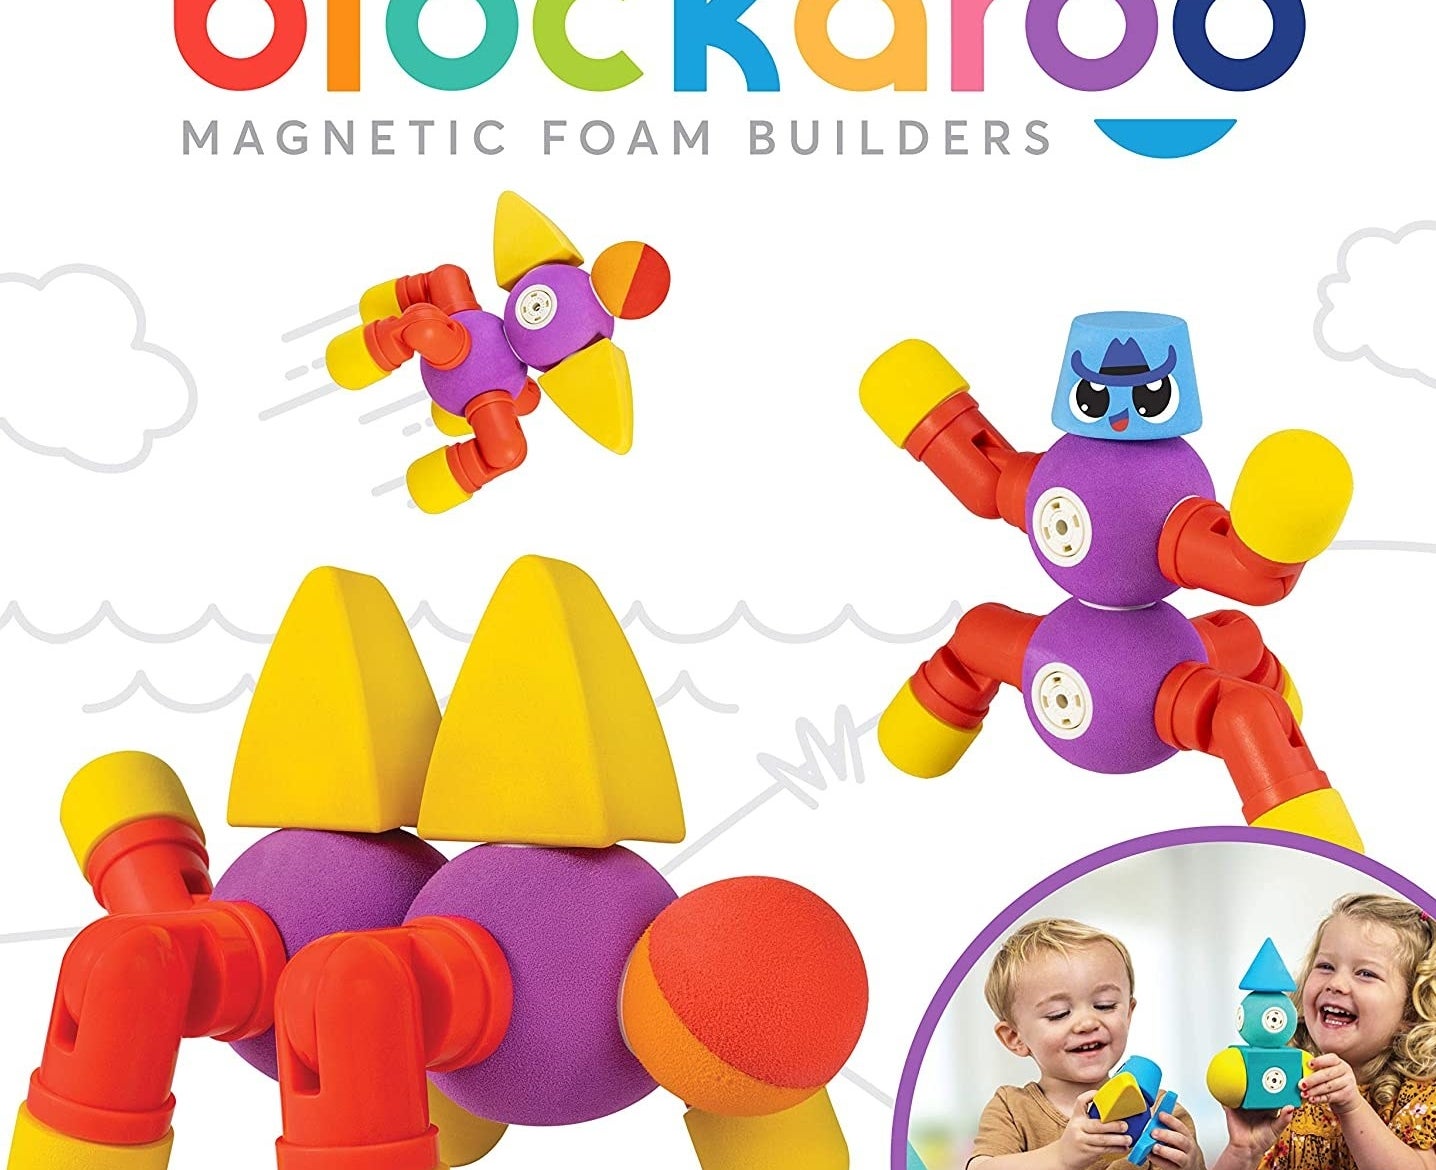 Purple, red, and yellow Blockaroo toys turned into different creatures and vehicles